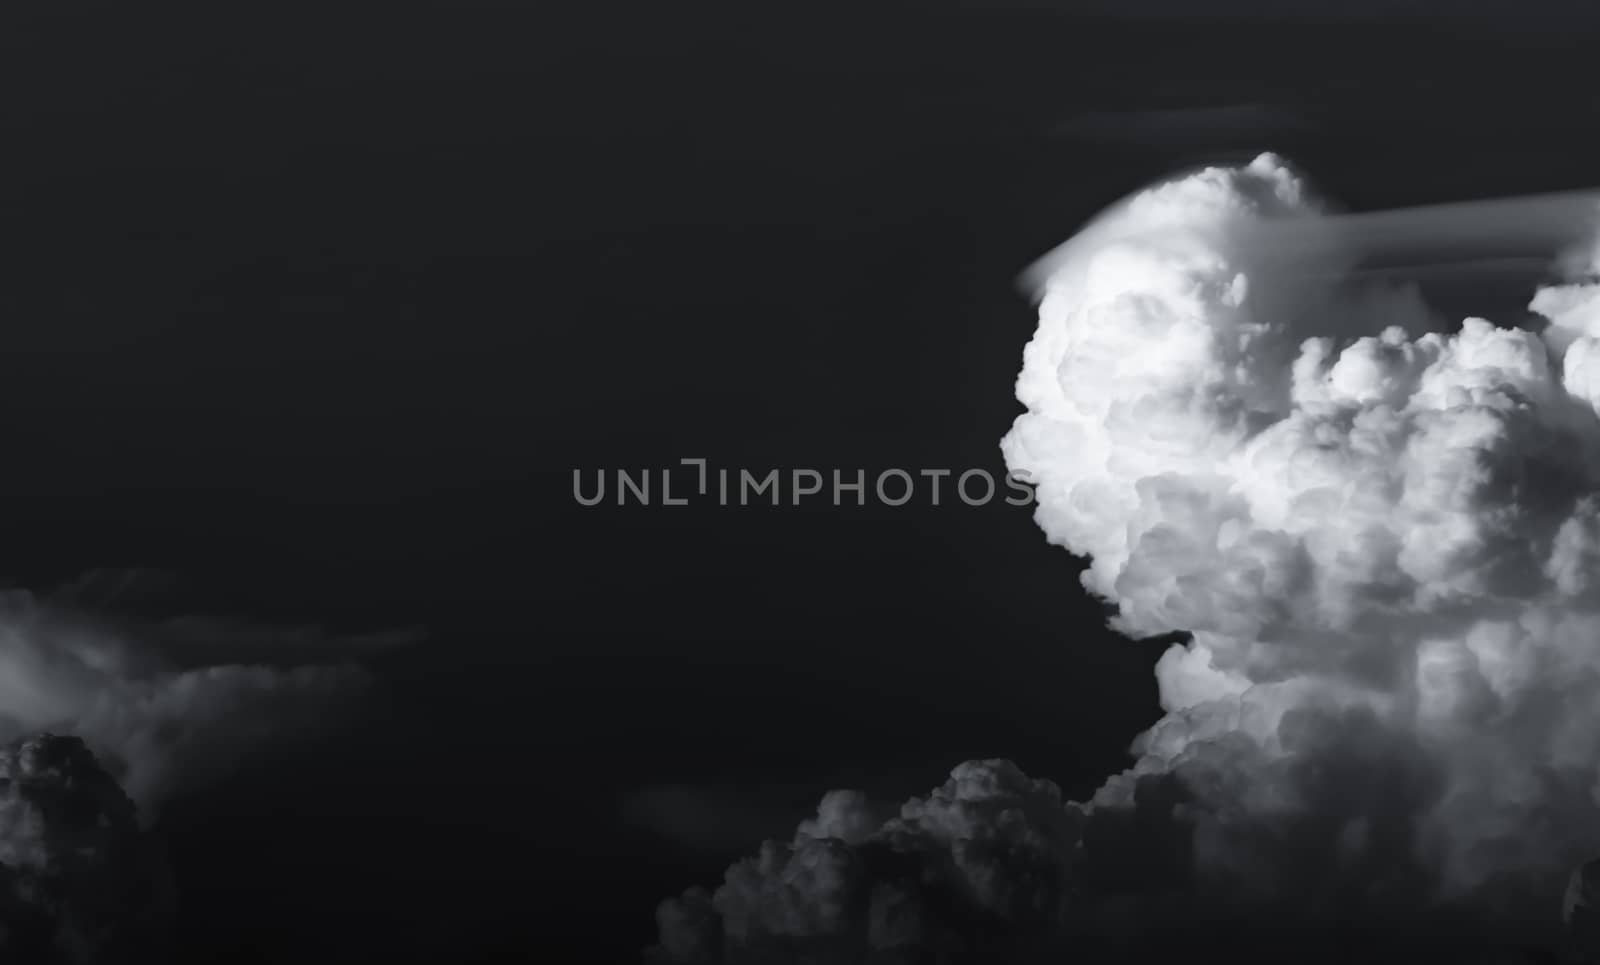 Dark dramatic sky and clouds. Background for death and sad concept. Black sky and white fluffy clouds. Sad and moody sky. Beauty in nature. Dead abstract background. Beautiful pattern of clouds.